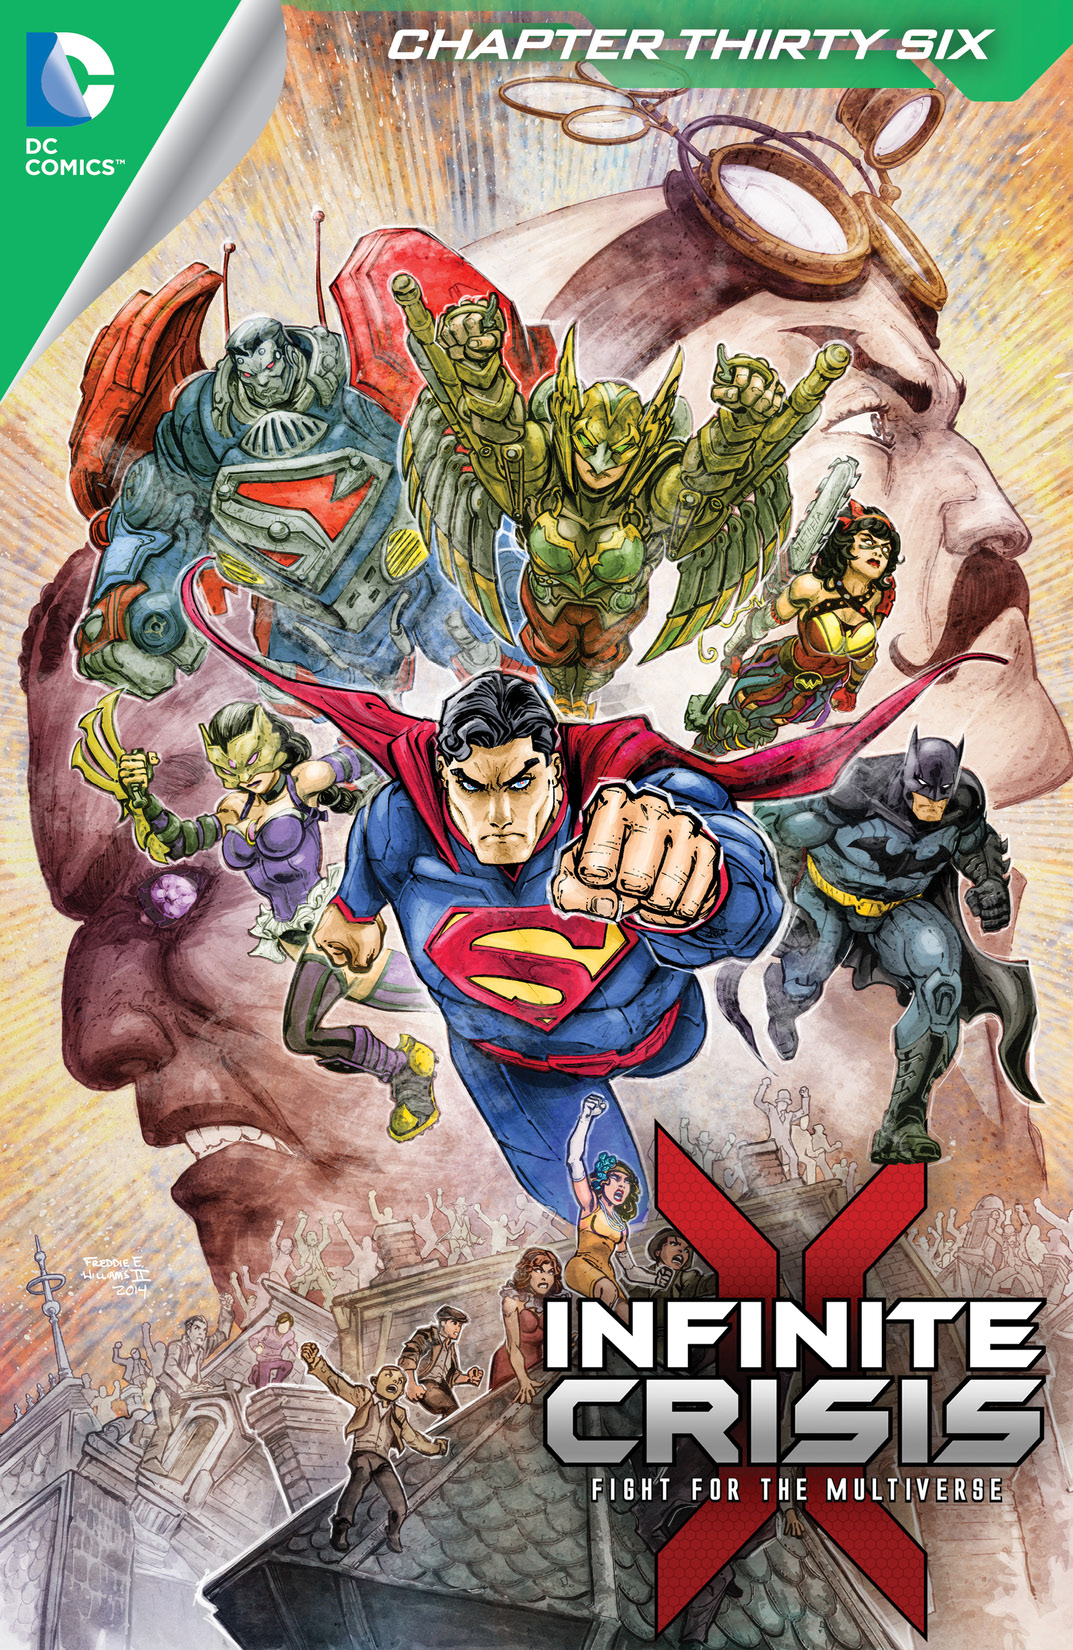 Infinite Crisis: Fight for the Multiverse #36 preview images